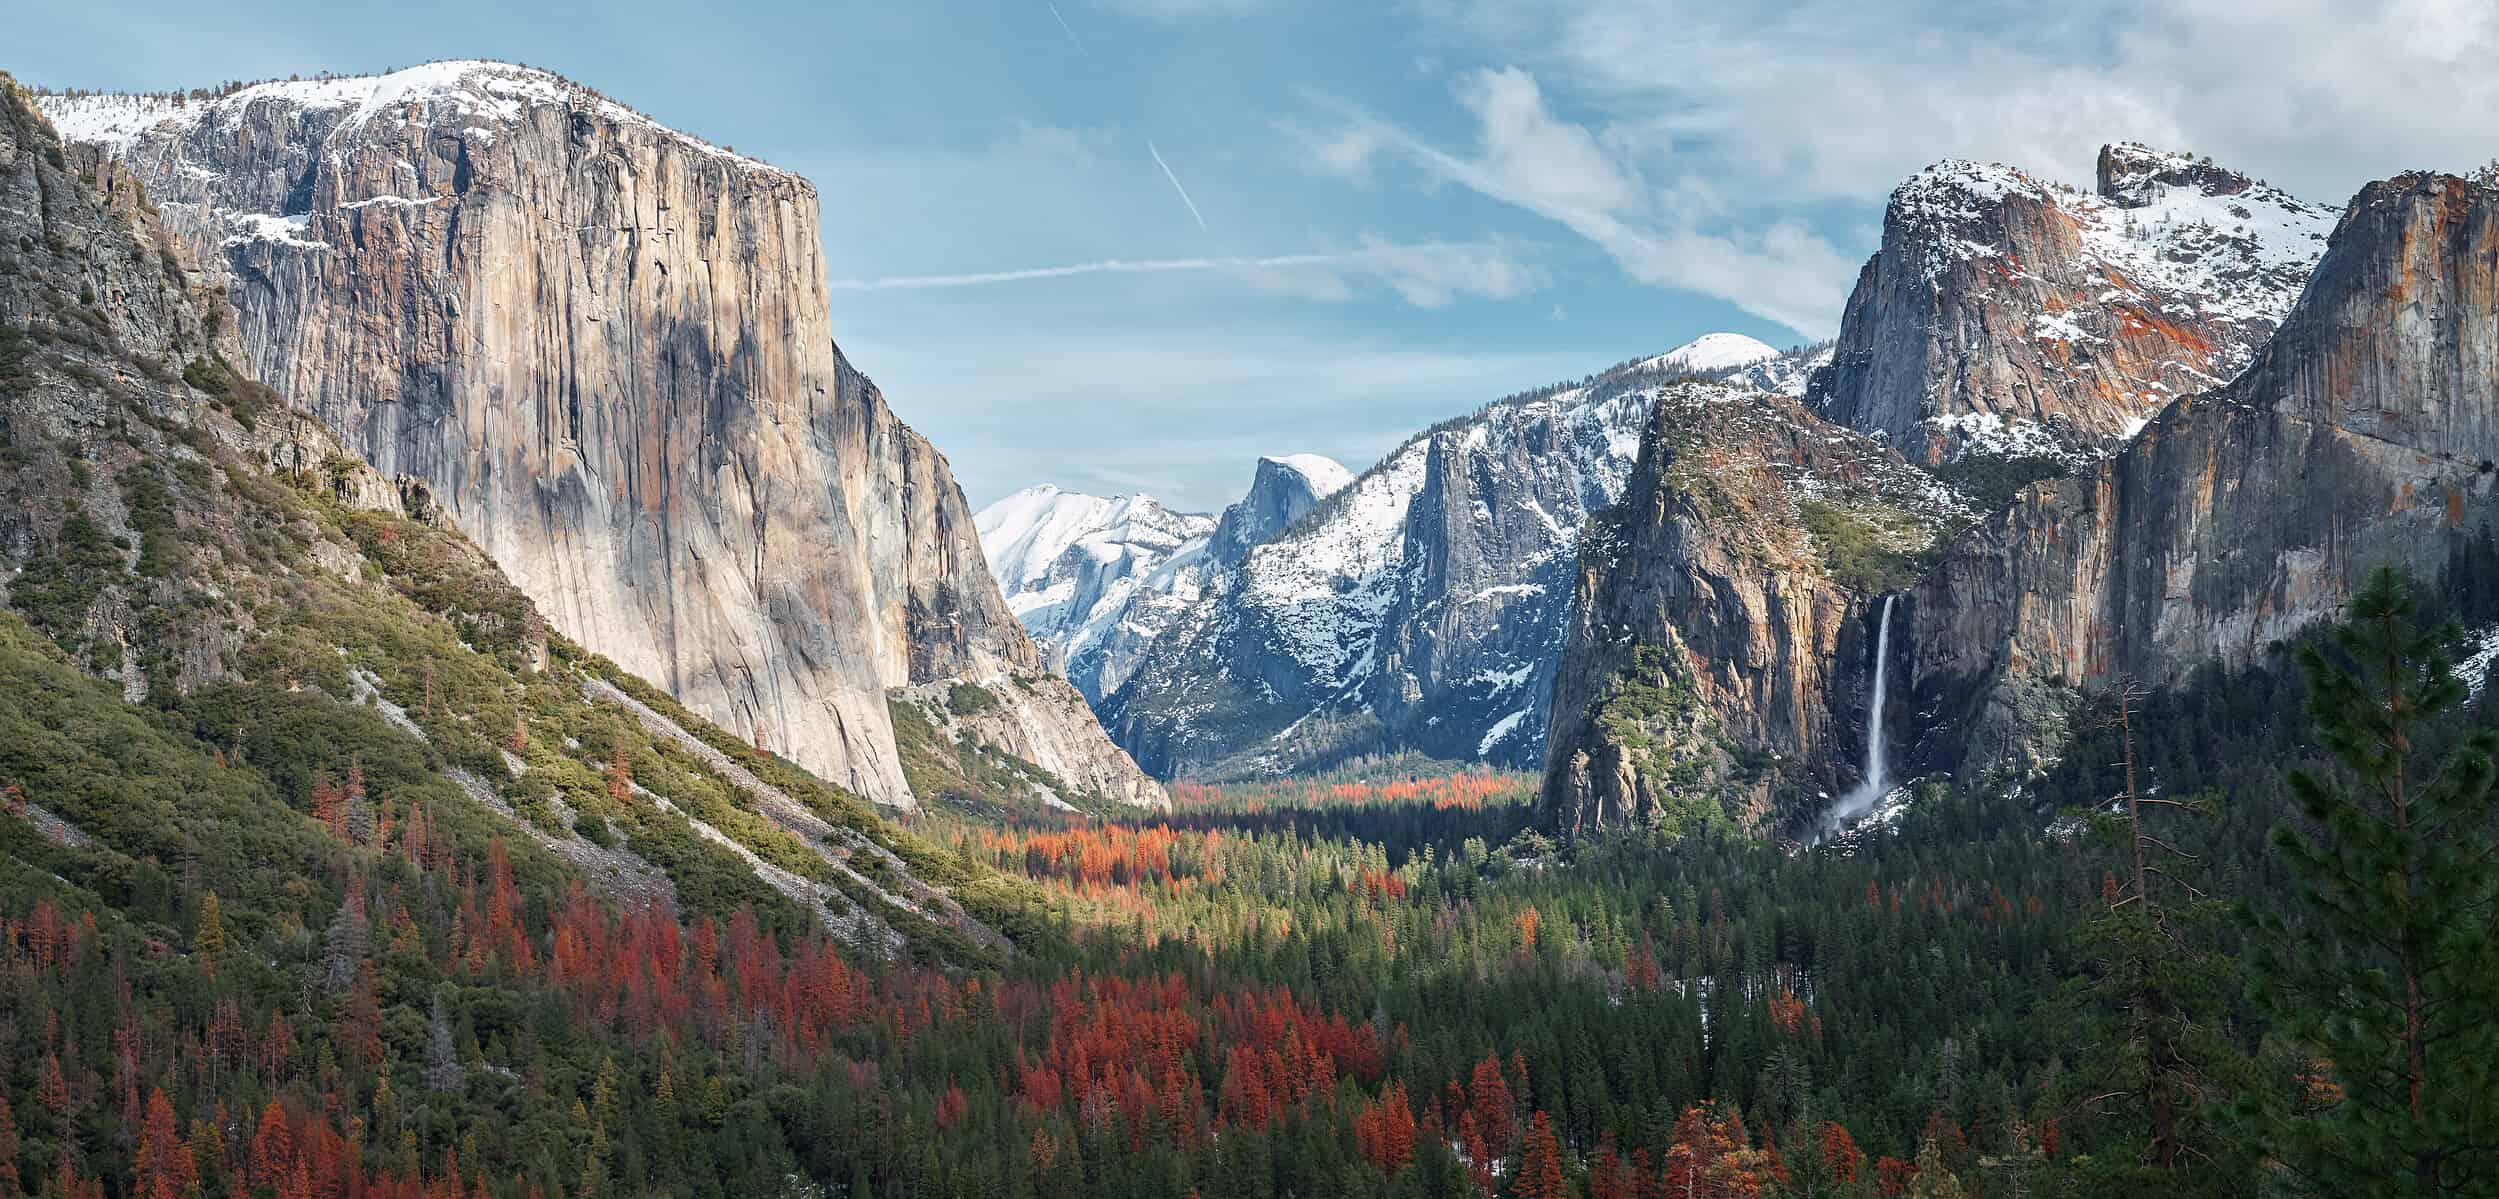 a view of Yosemite Valley with mountains in the background.